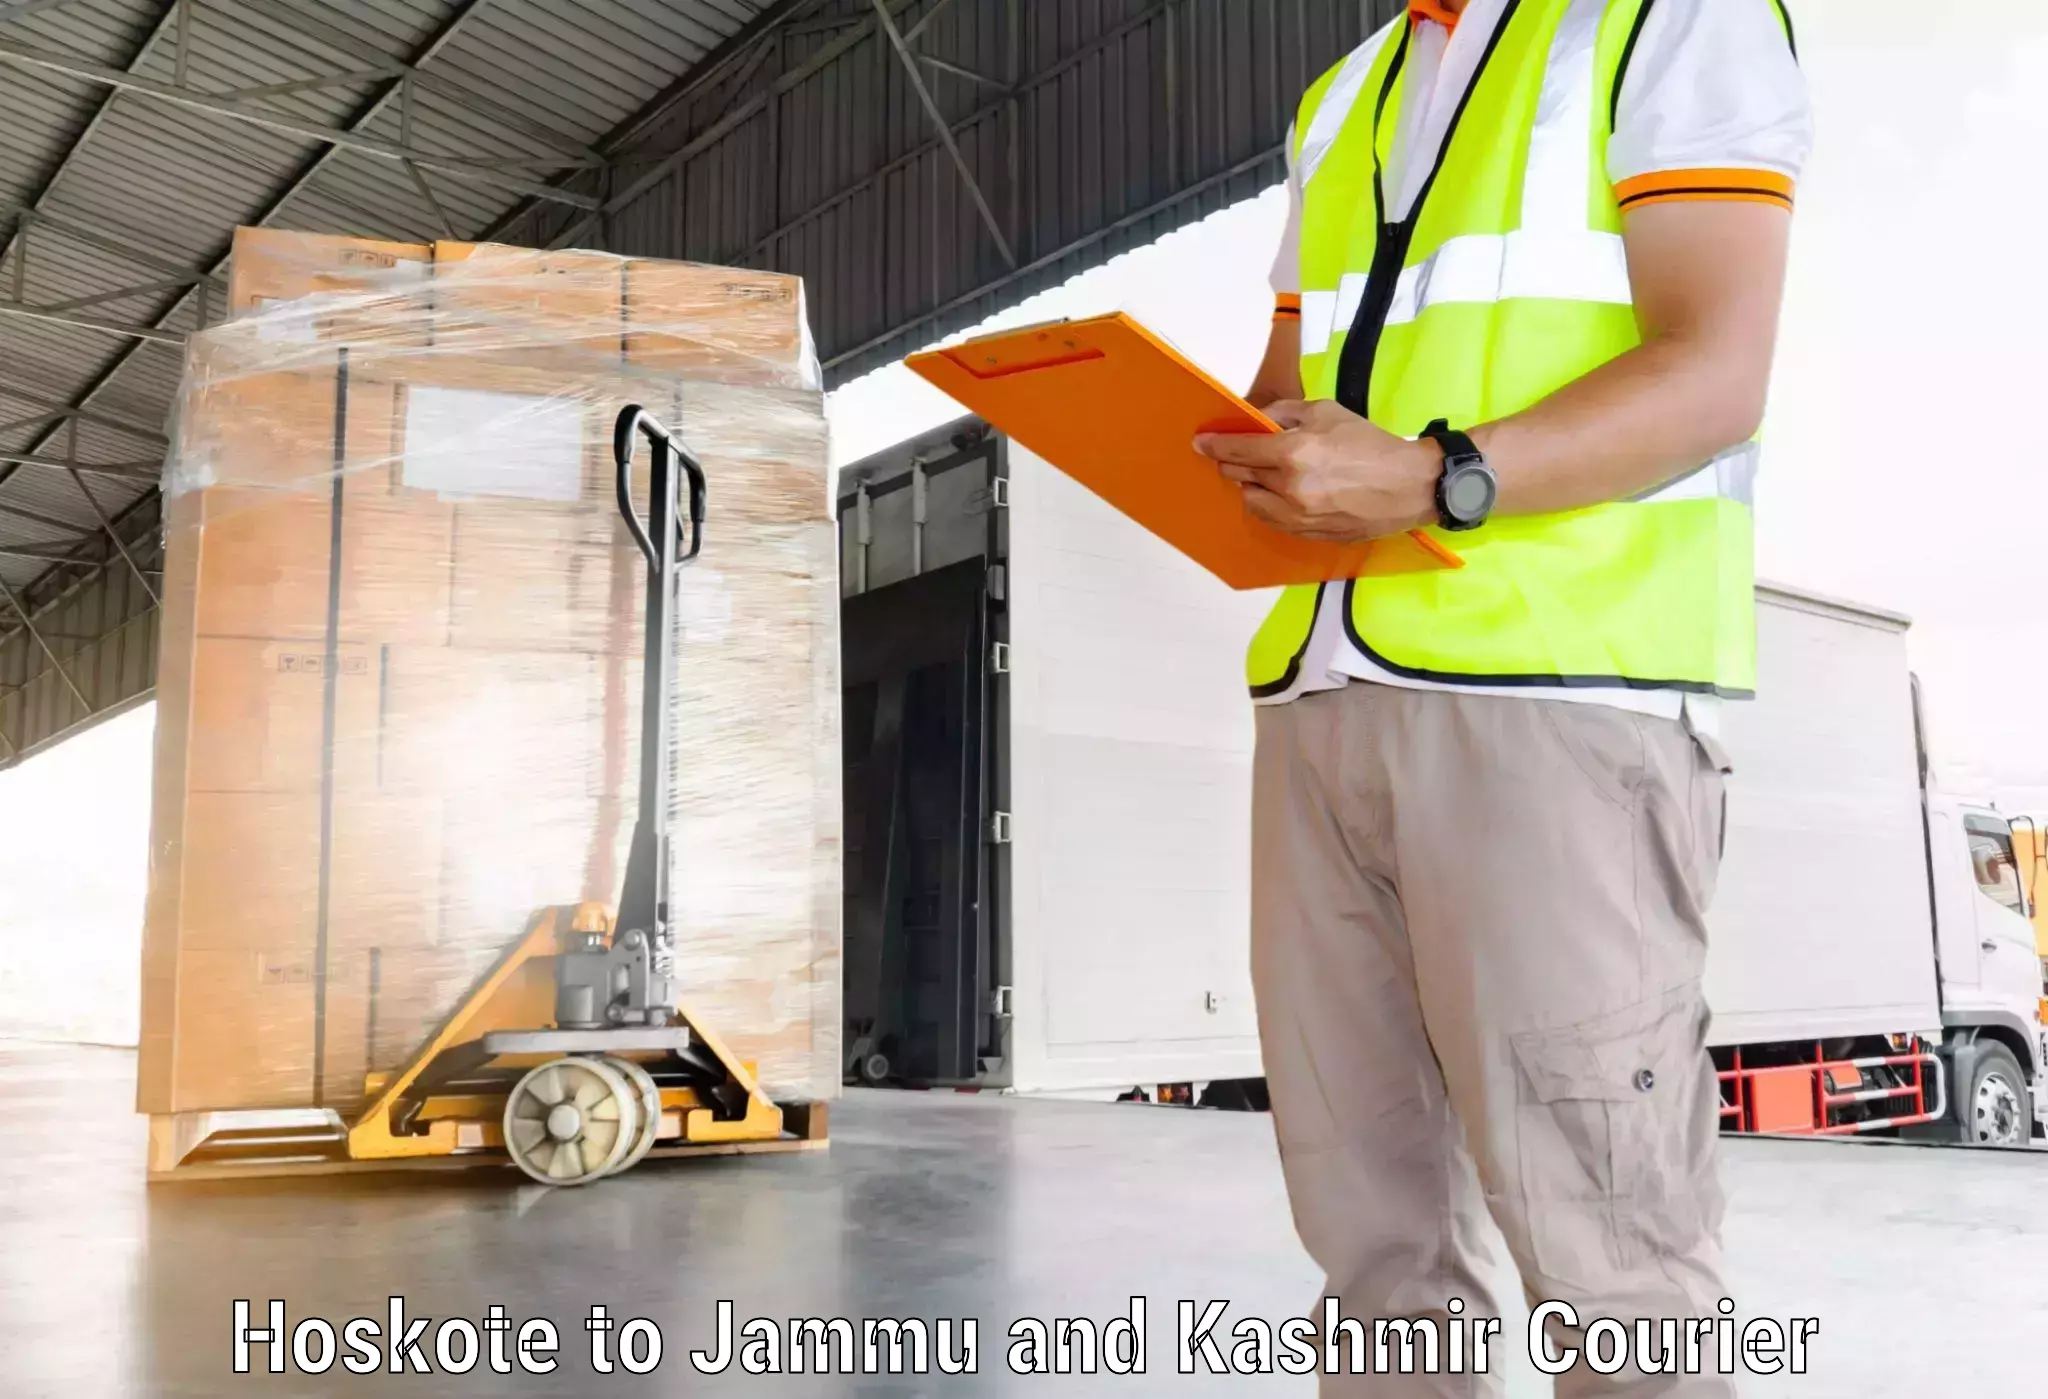 Easy access courier services Hoskote to Anantnag